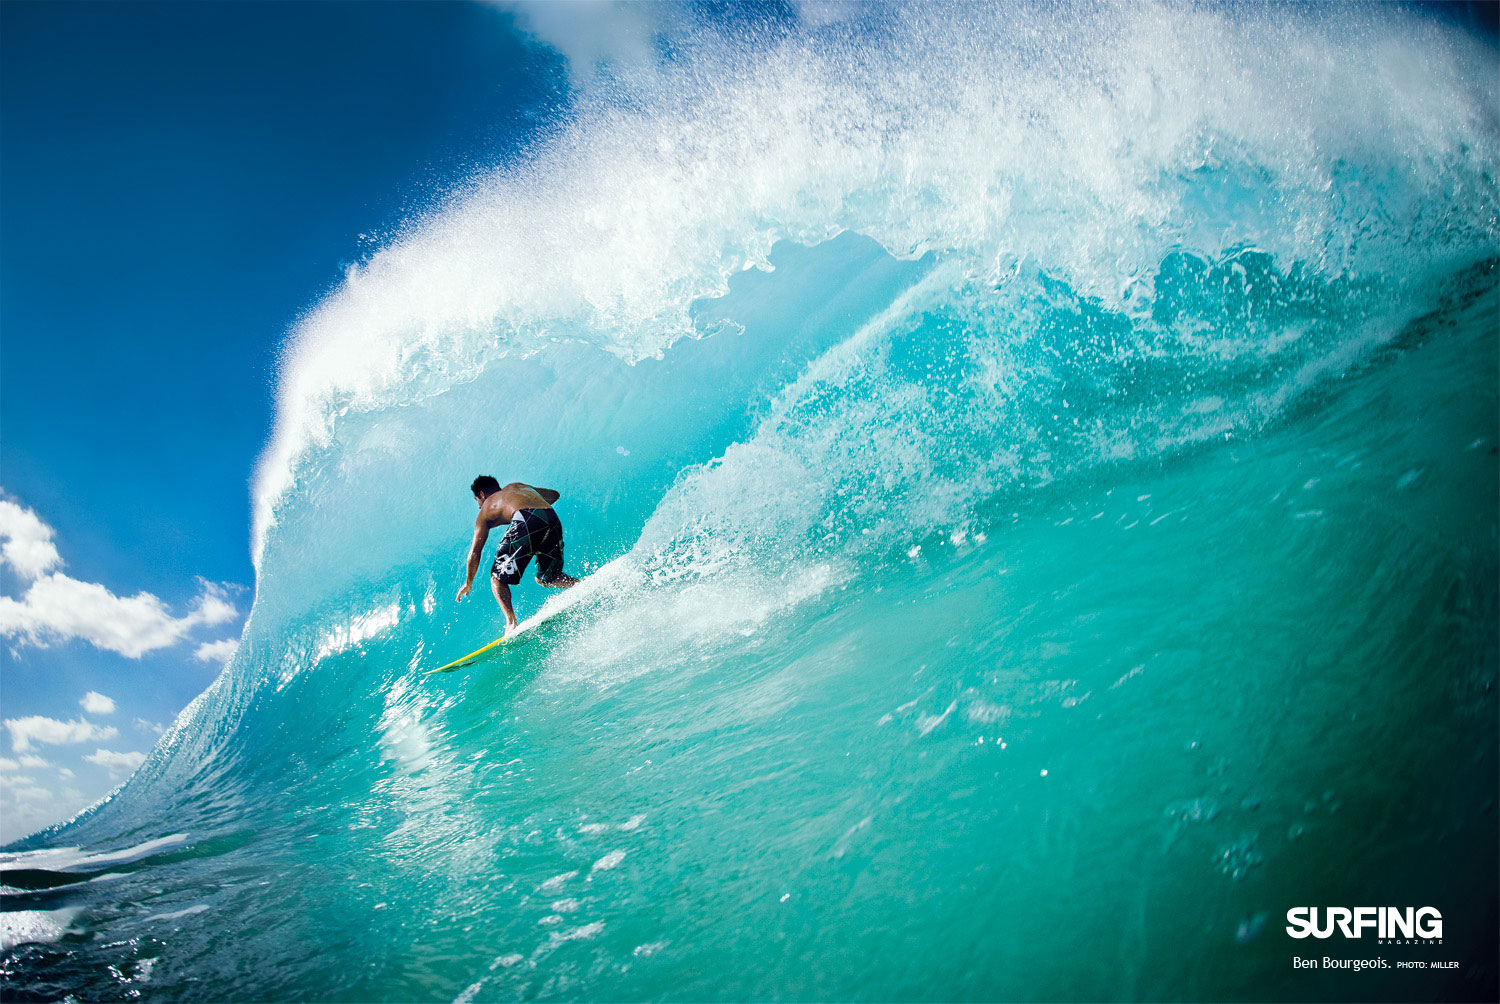 Desktop Wallpaperawesome Photos From Surfing Magazine Surfbang